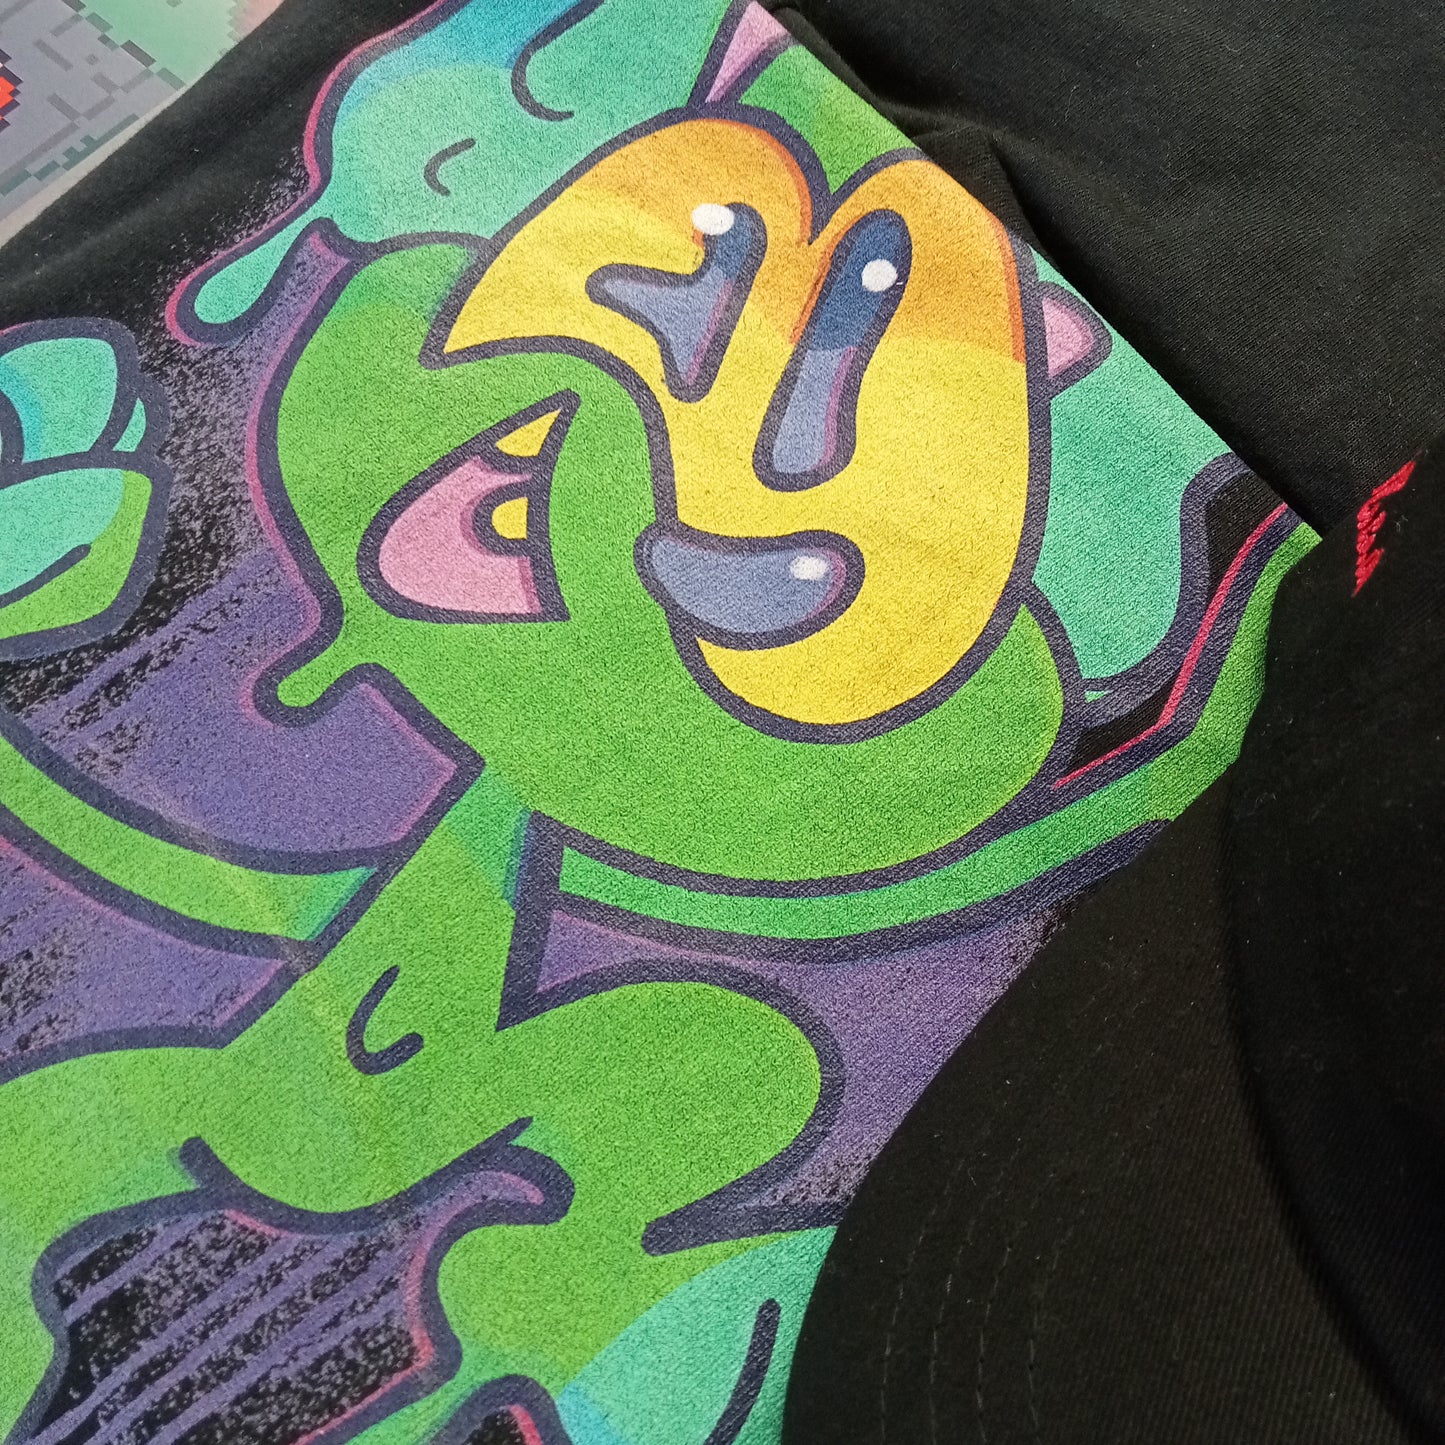 Green slime graffiti character by streetwear brand CORKiE, printed onto a black shirt with a spray paint effect in the background.